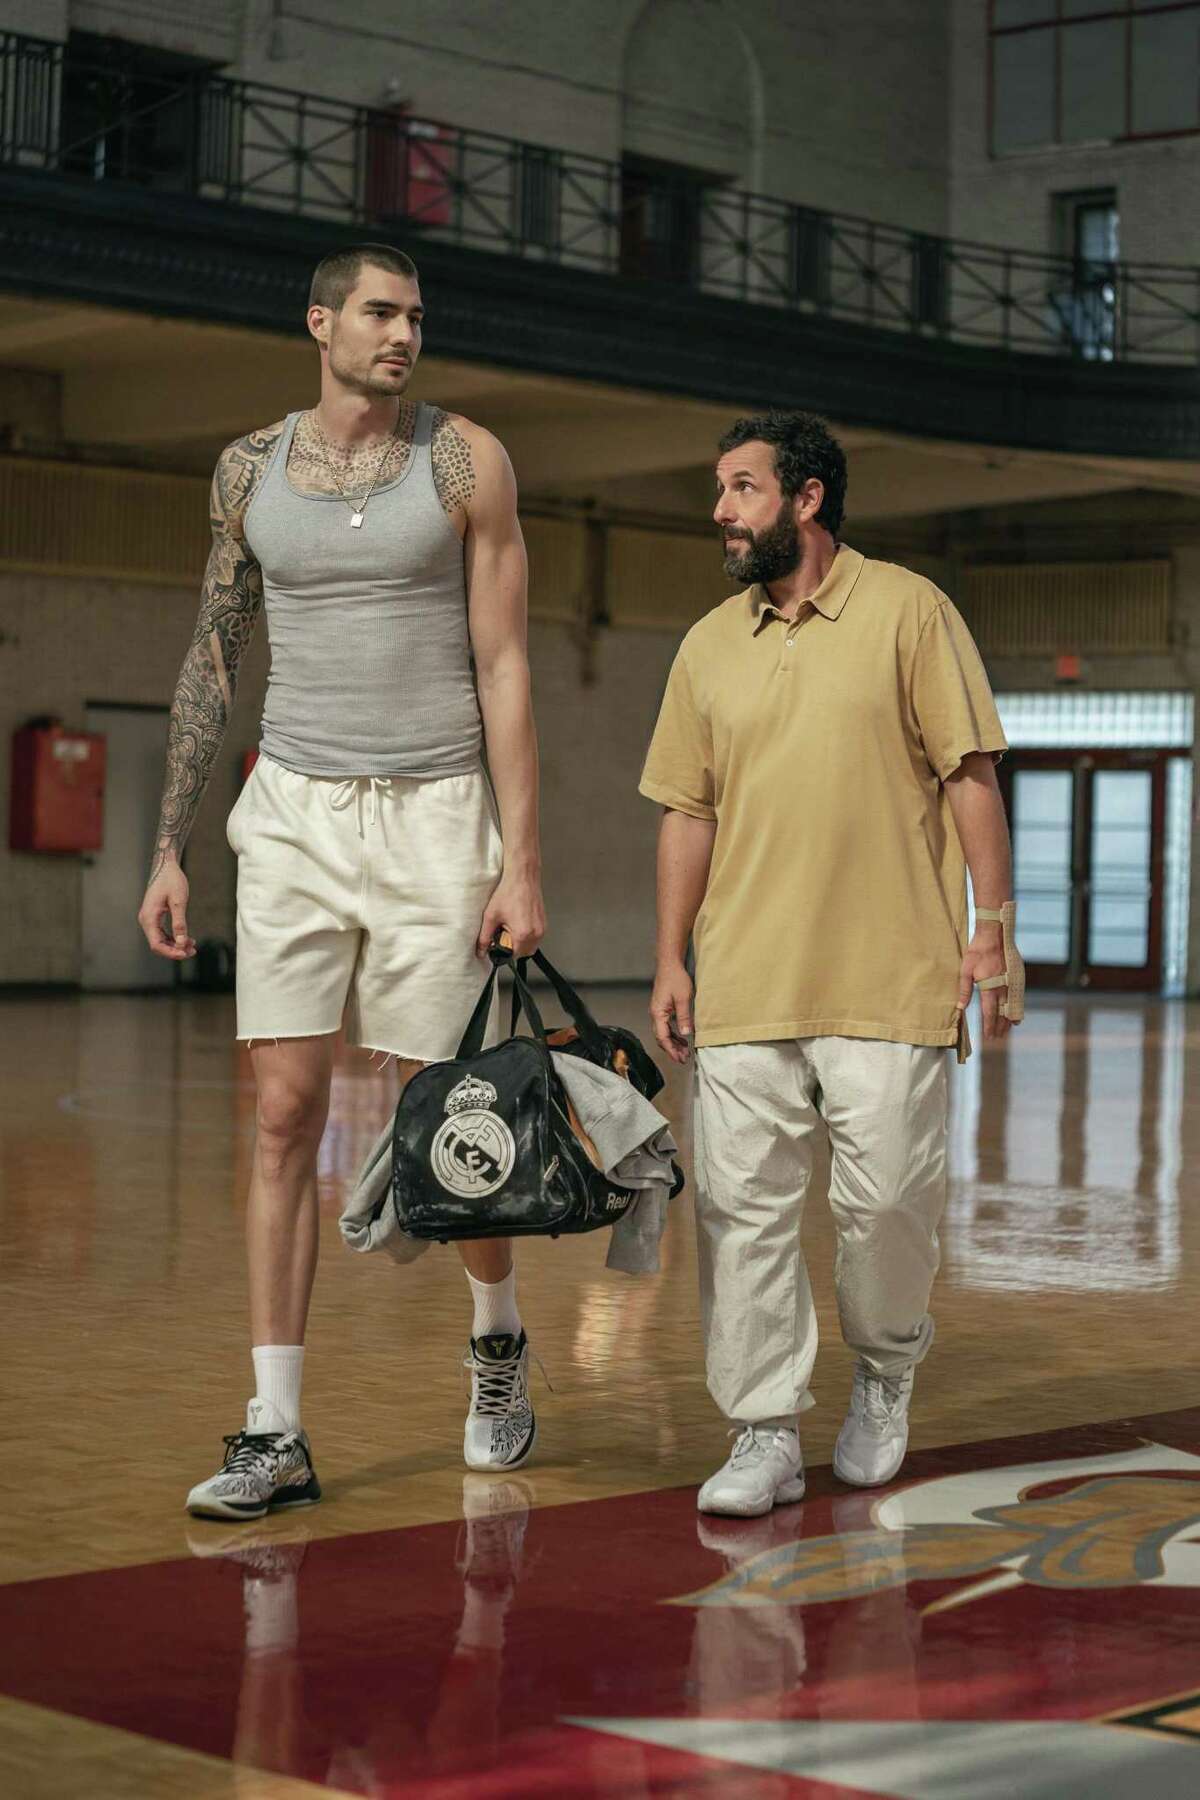 Juancho Hernangomez, left, is the diamond in the rough and Adam Sandler is the guy committed to getting him signed to a team in "Hustle." (Cassy Athena/Netflix/TNS)